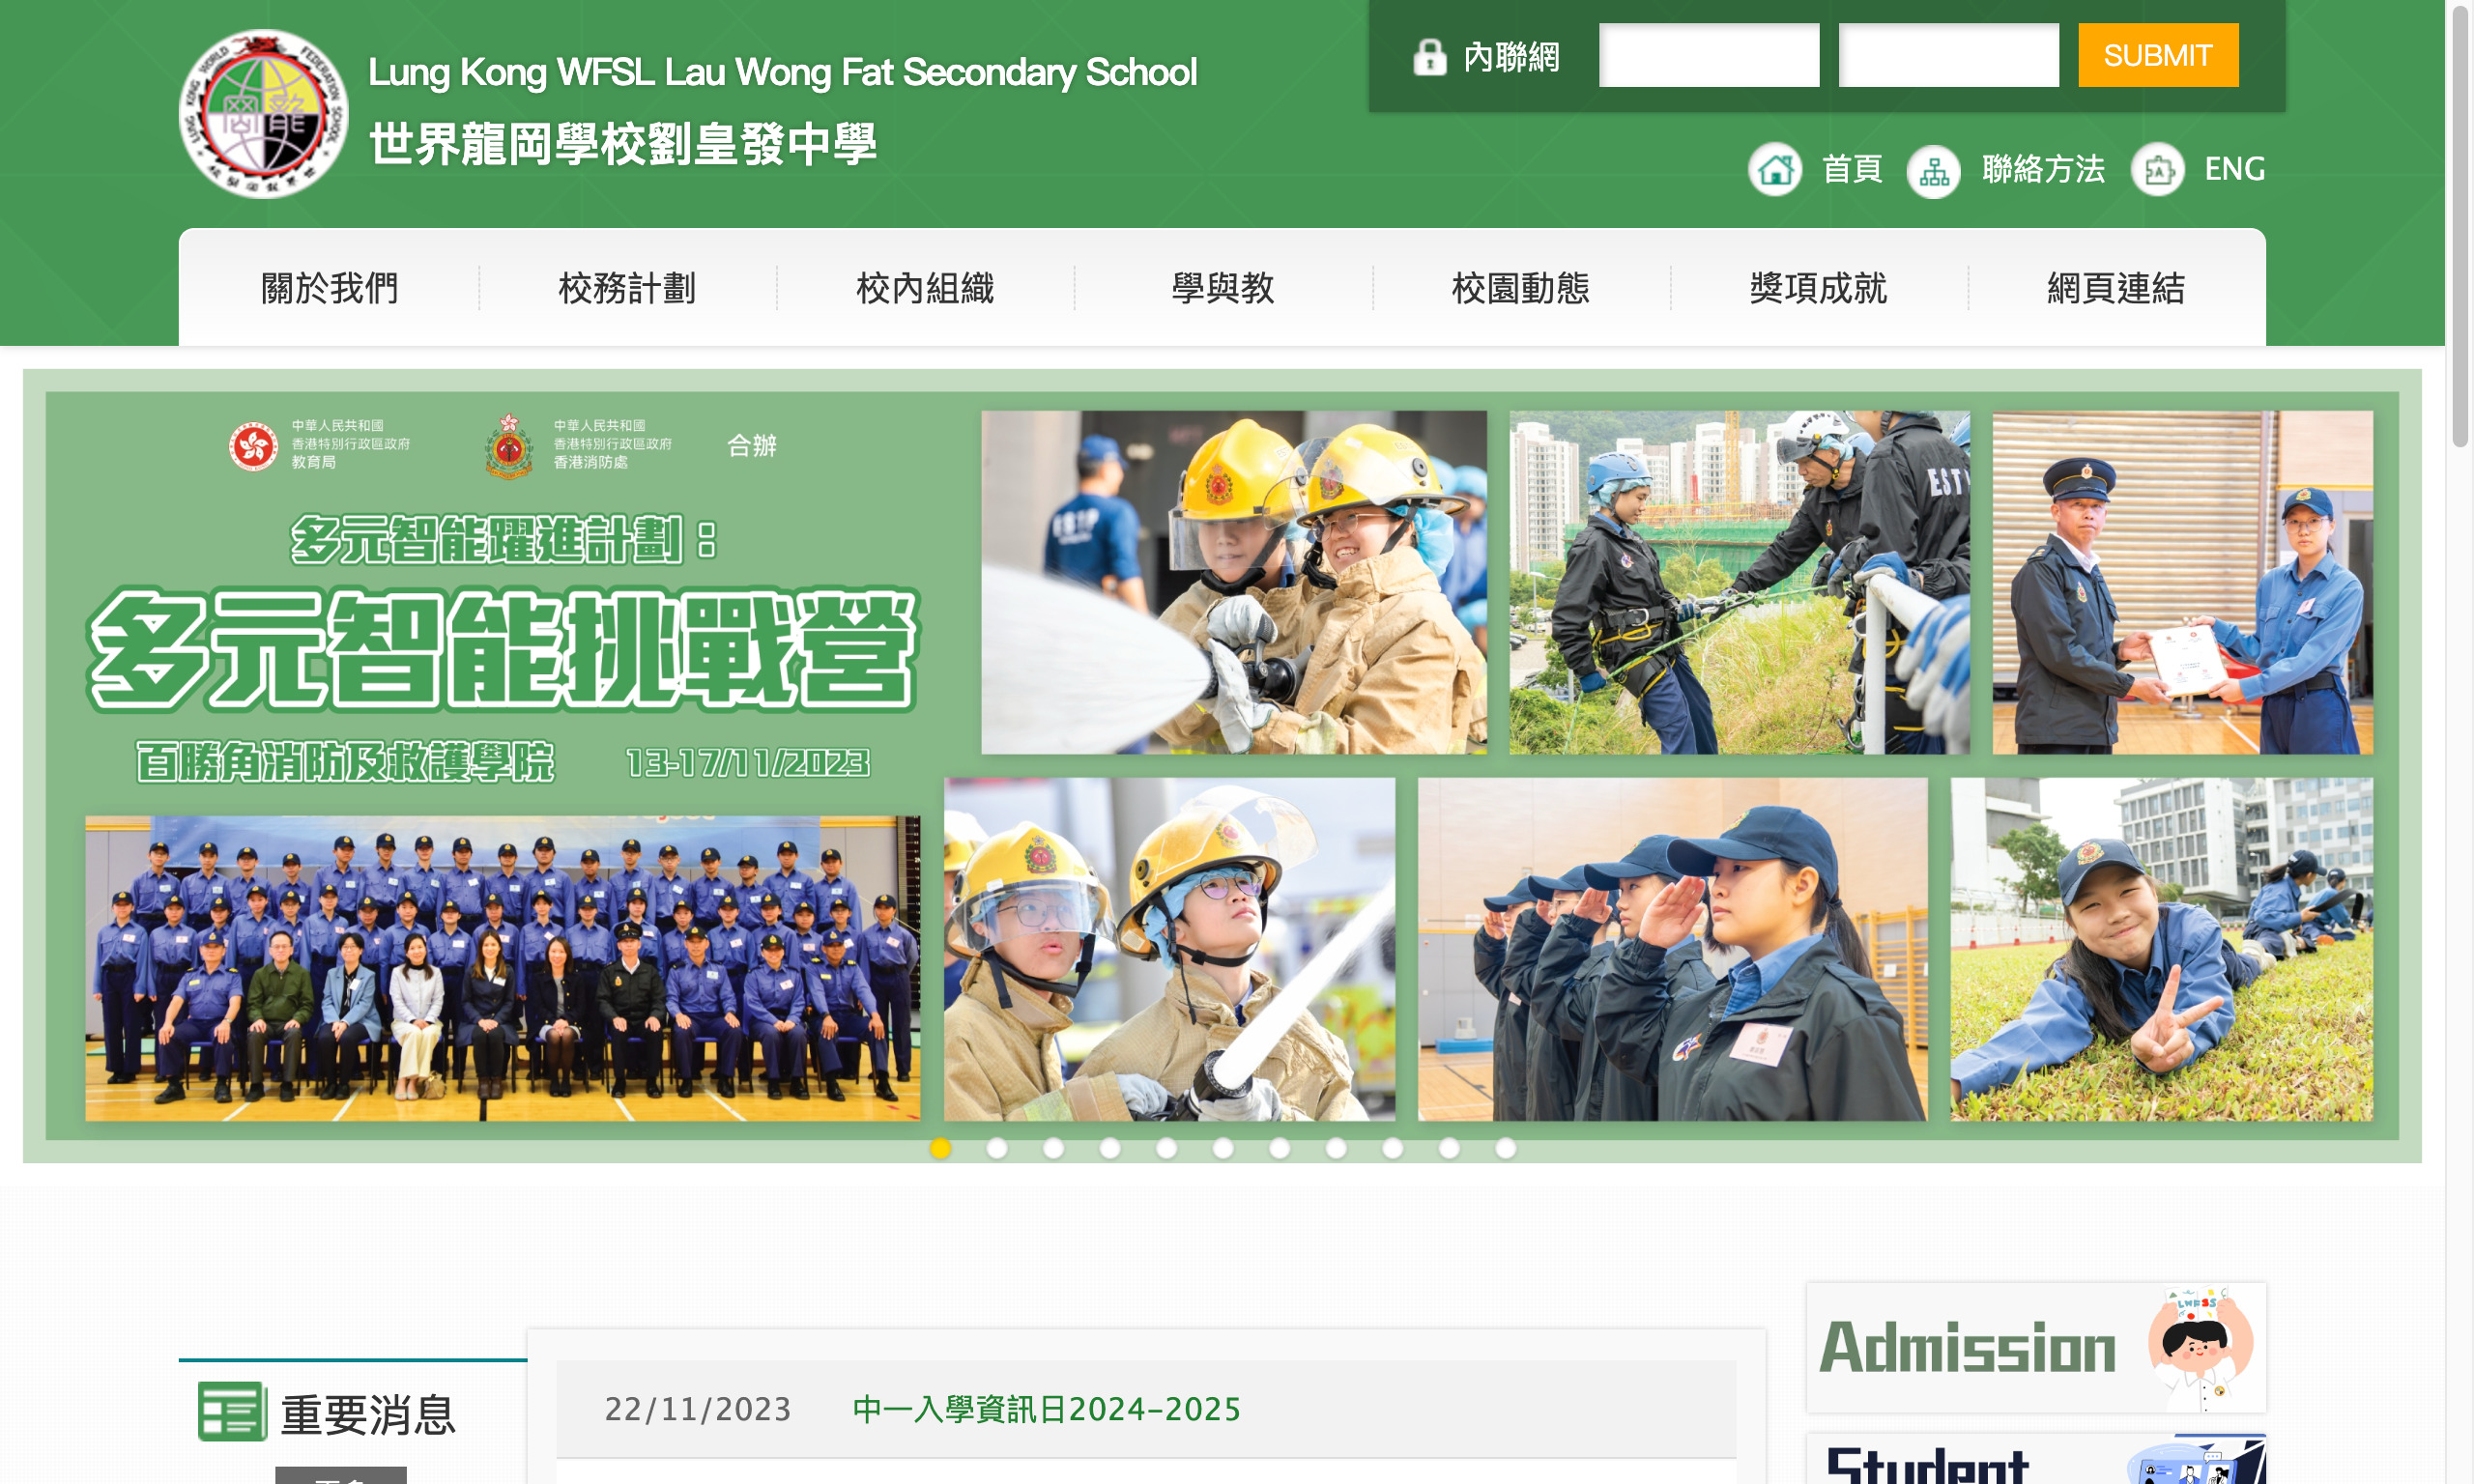 Screenshot of the Home Page of Lung Kong WFSL Lau Wong Fat Secondary School